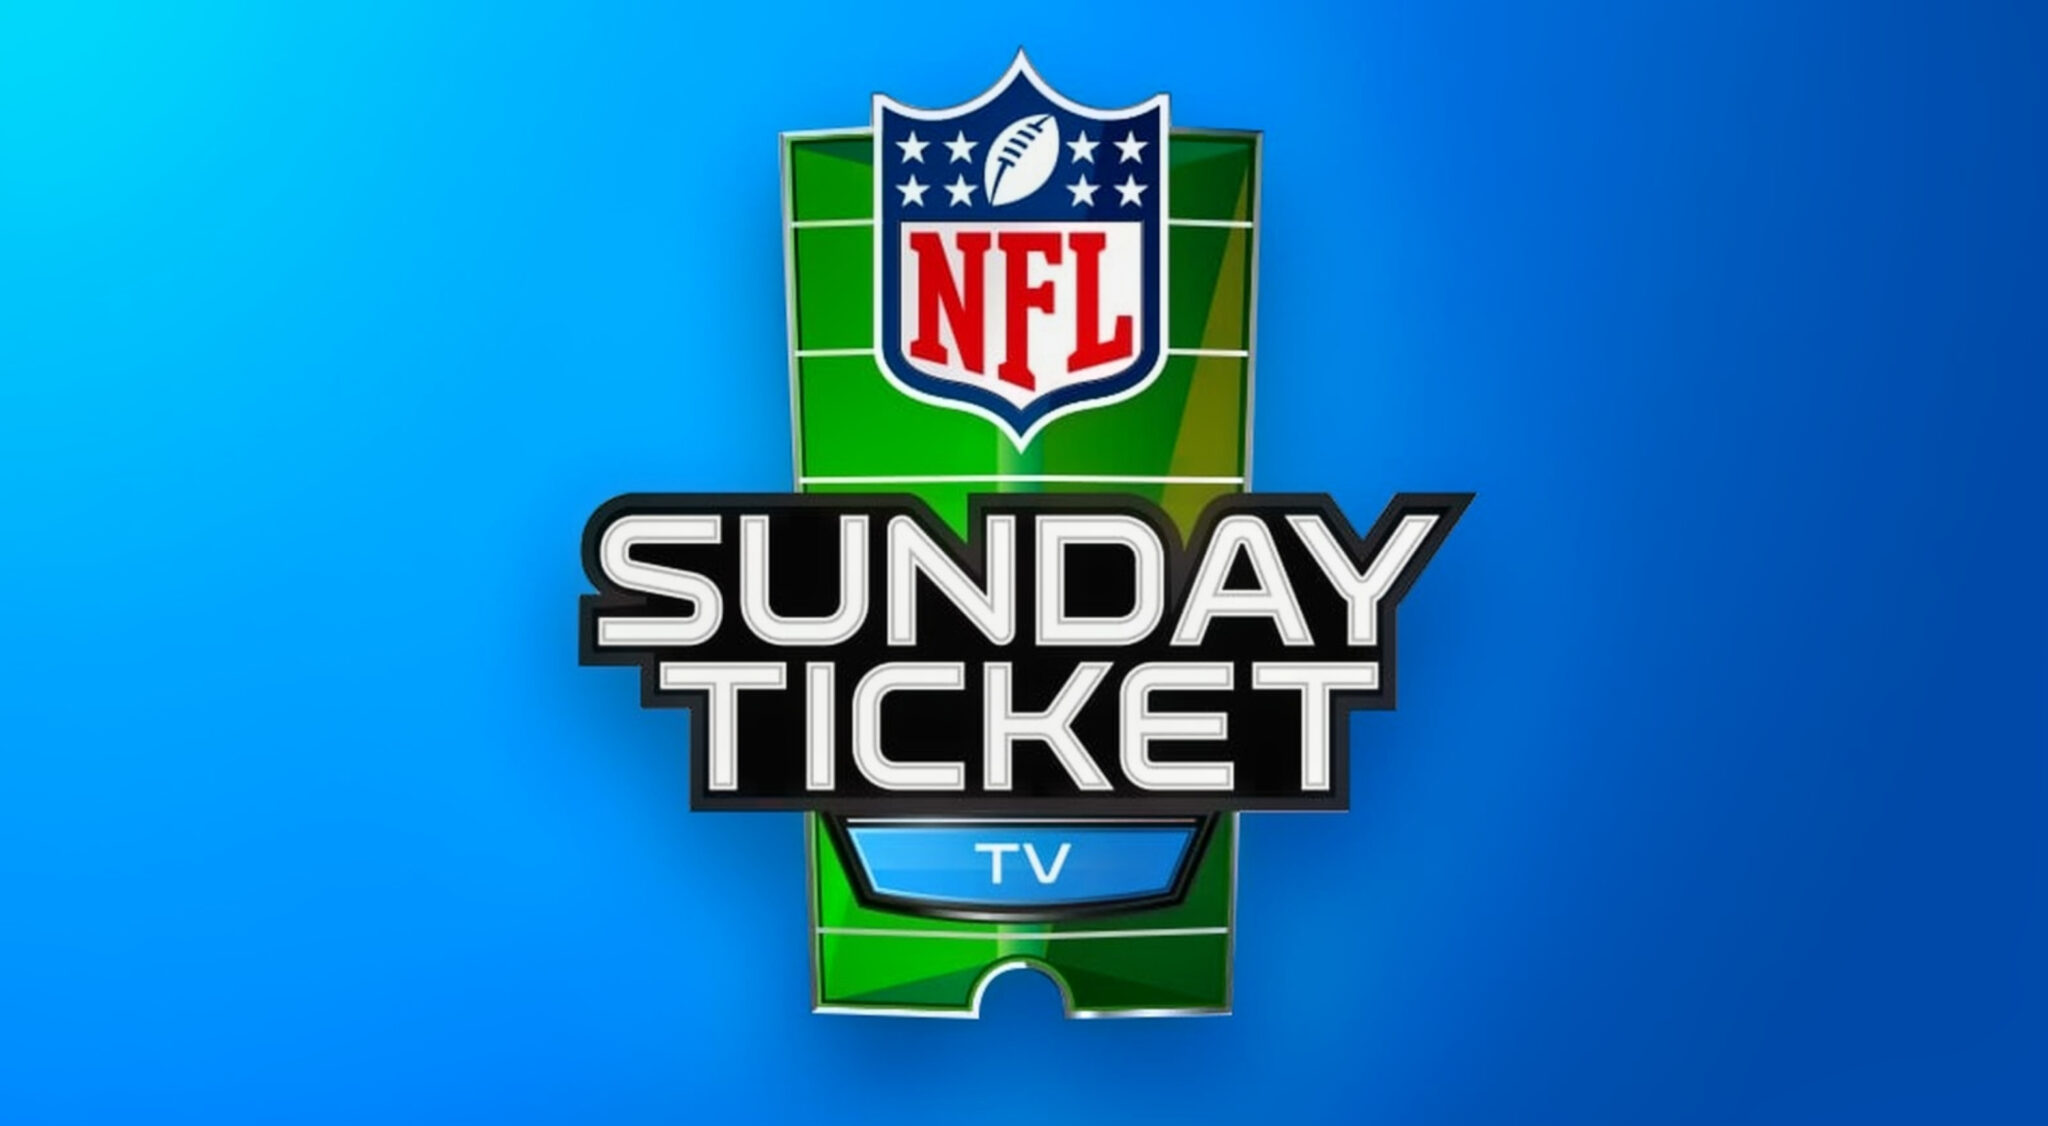 Price For 'NFL Sunday Ticket' Is Set To Increase This Week